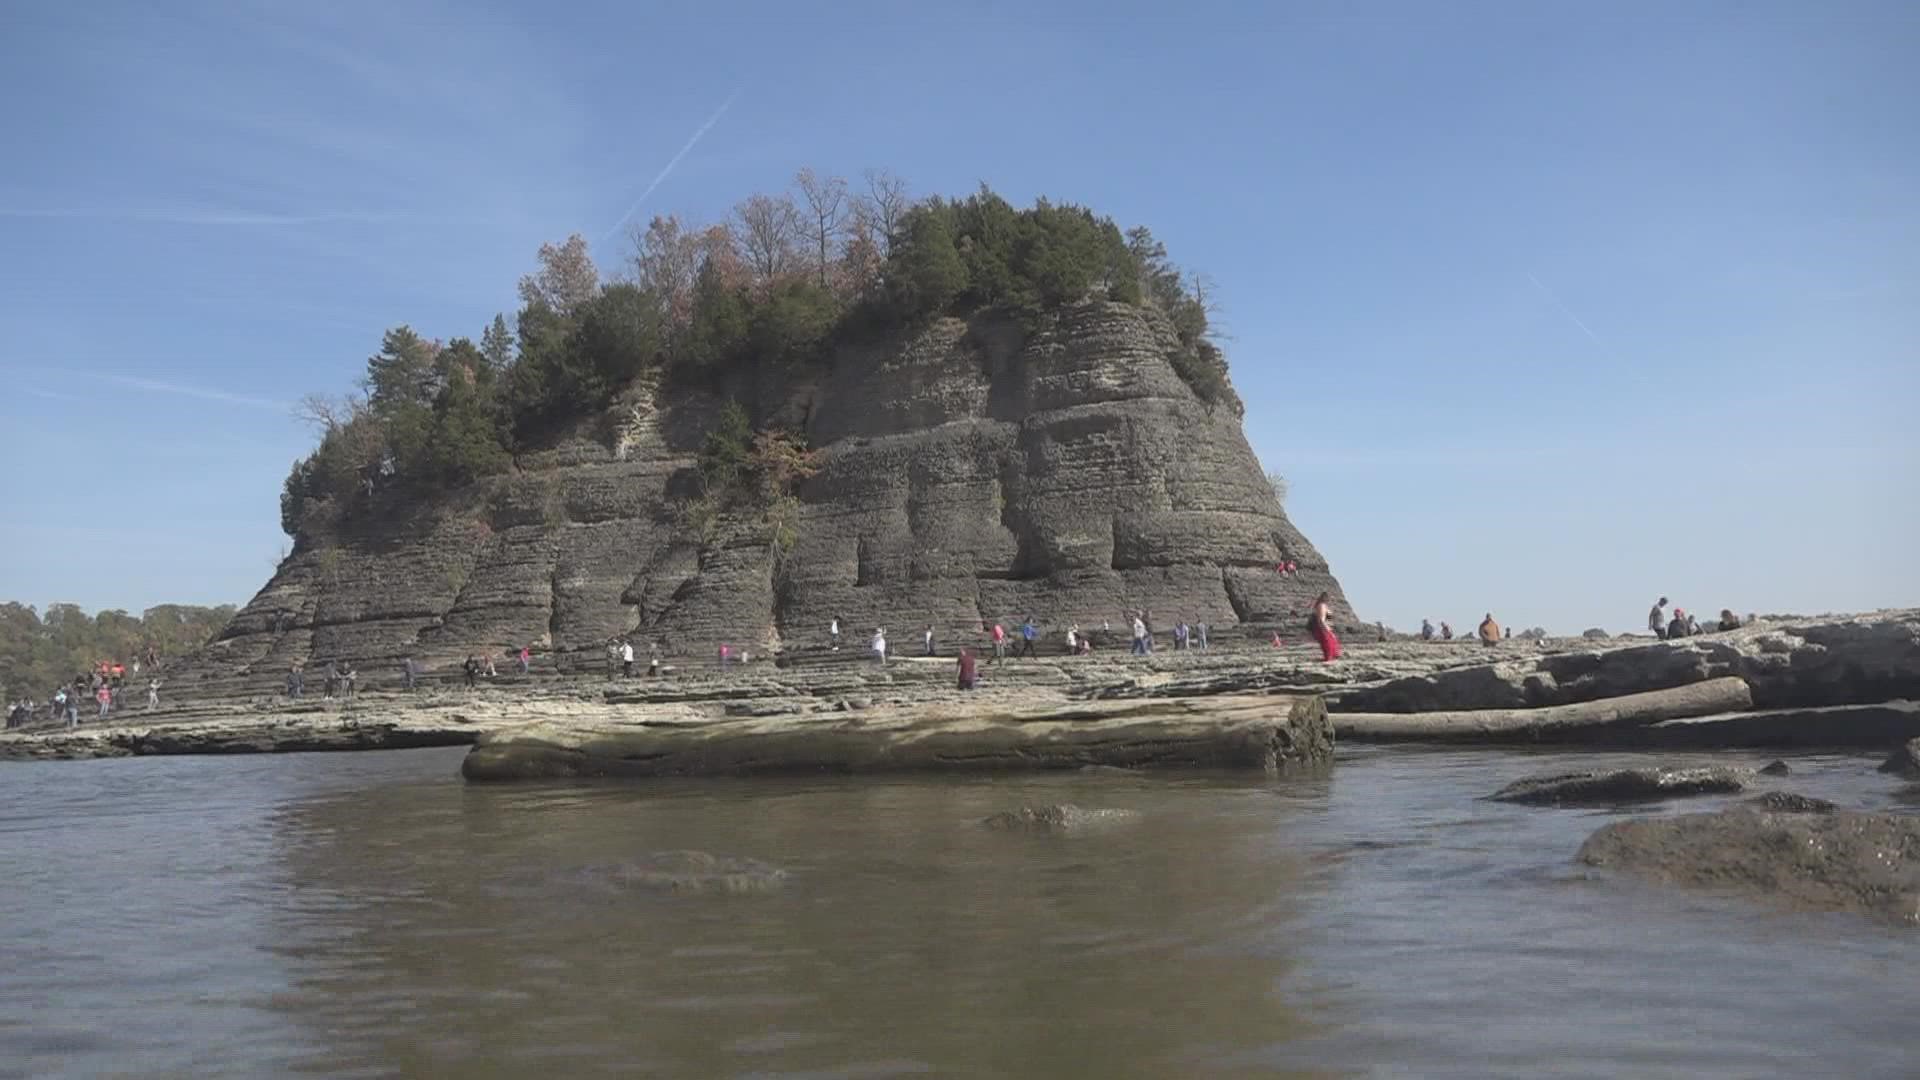 Tower Rock has turned into a tourist destination following drought-like conditions. The low water levels have created a land bridge to the rock.